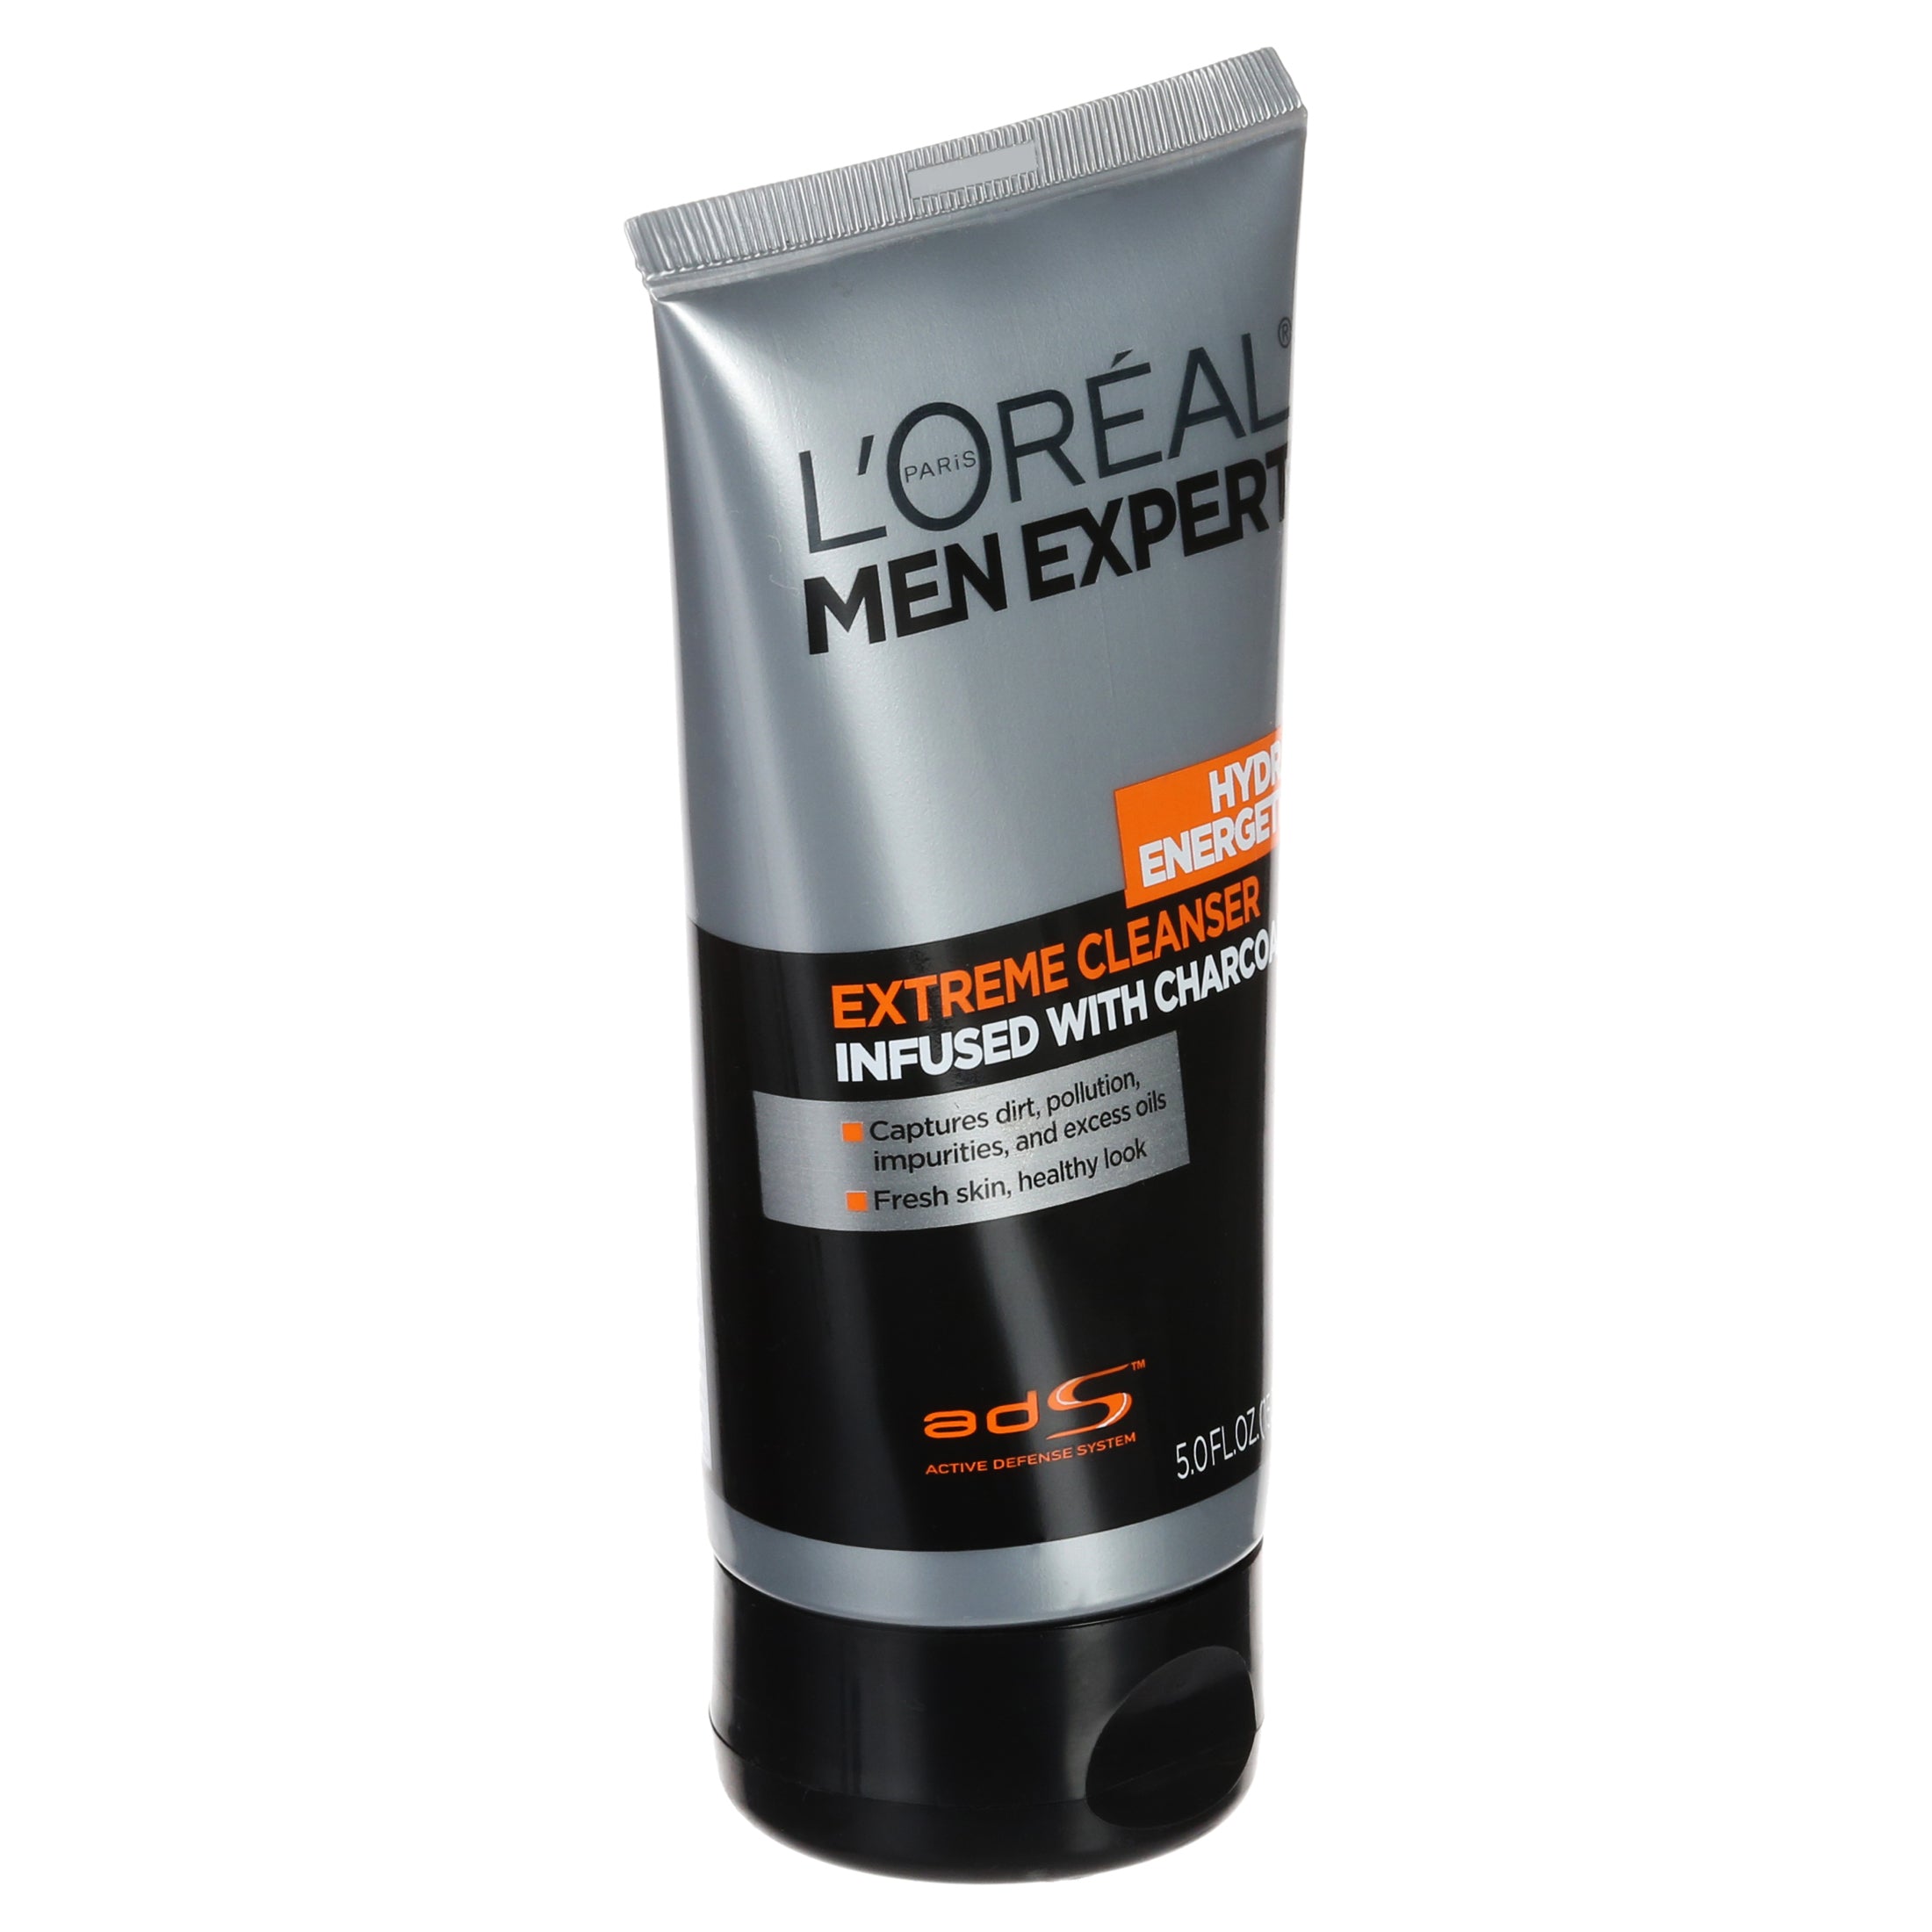 L'Oreal Paris Men Expert Hydra Energetic Extreme Cleanser Infused with Charcoal, 5 fl oz | MTTS399